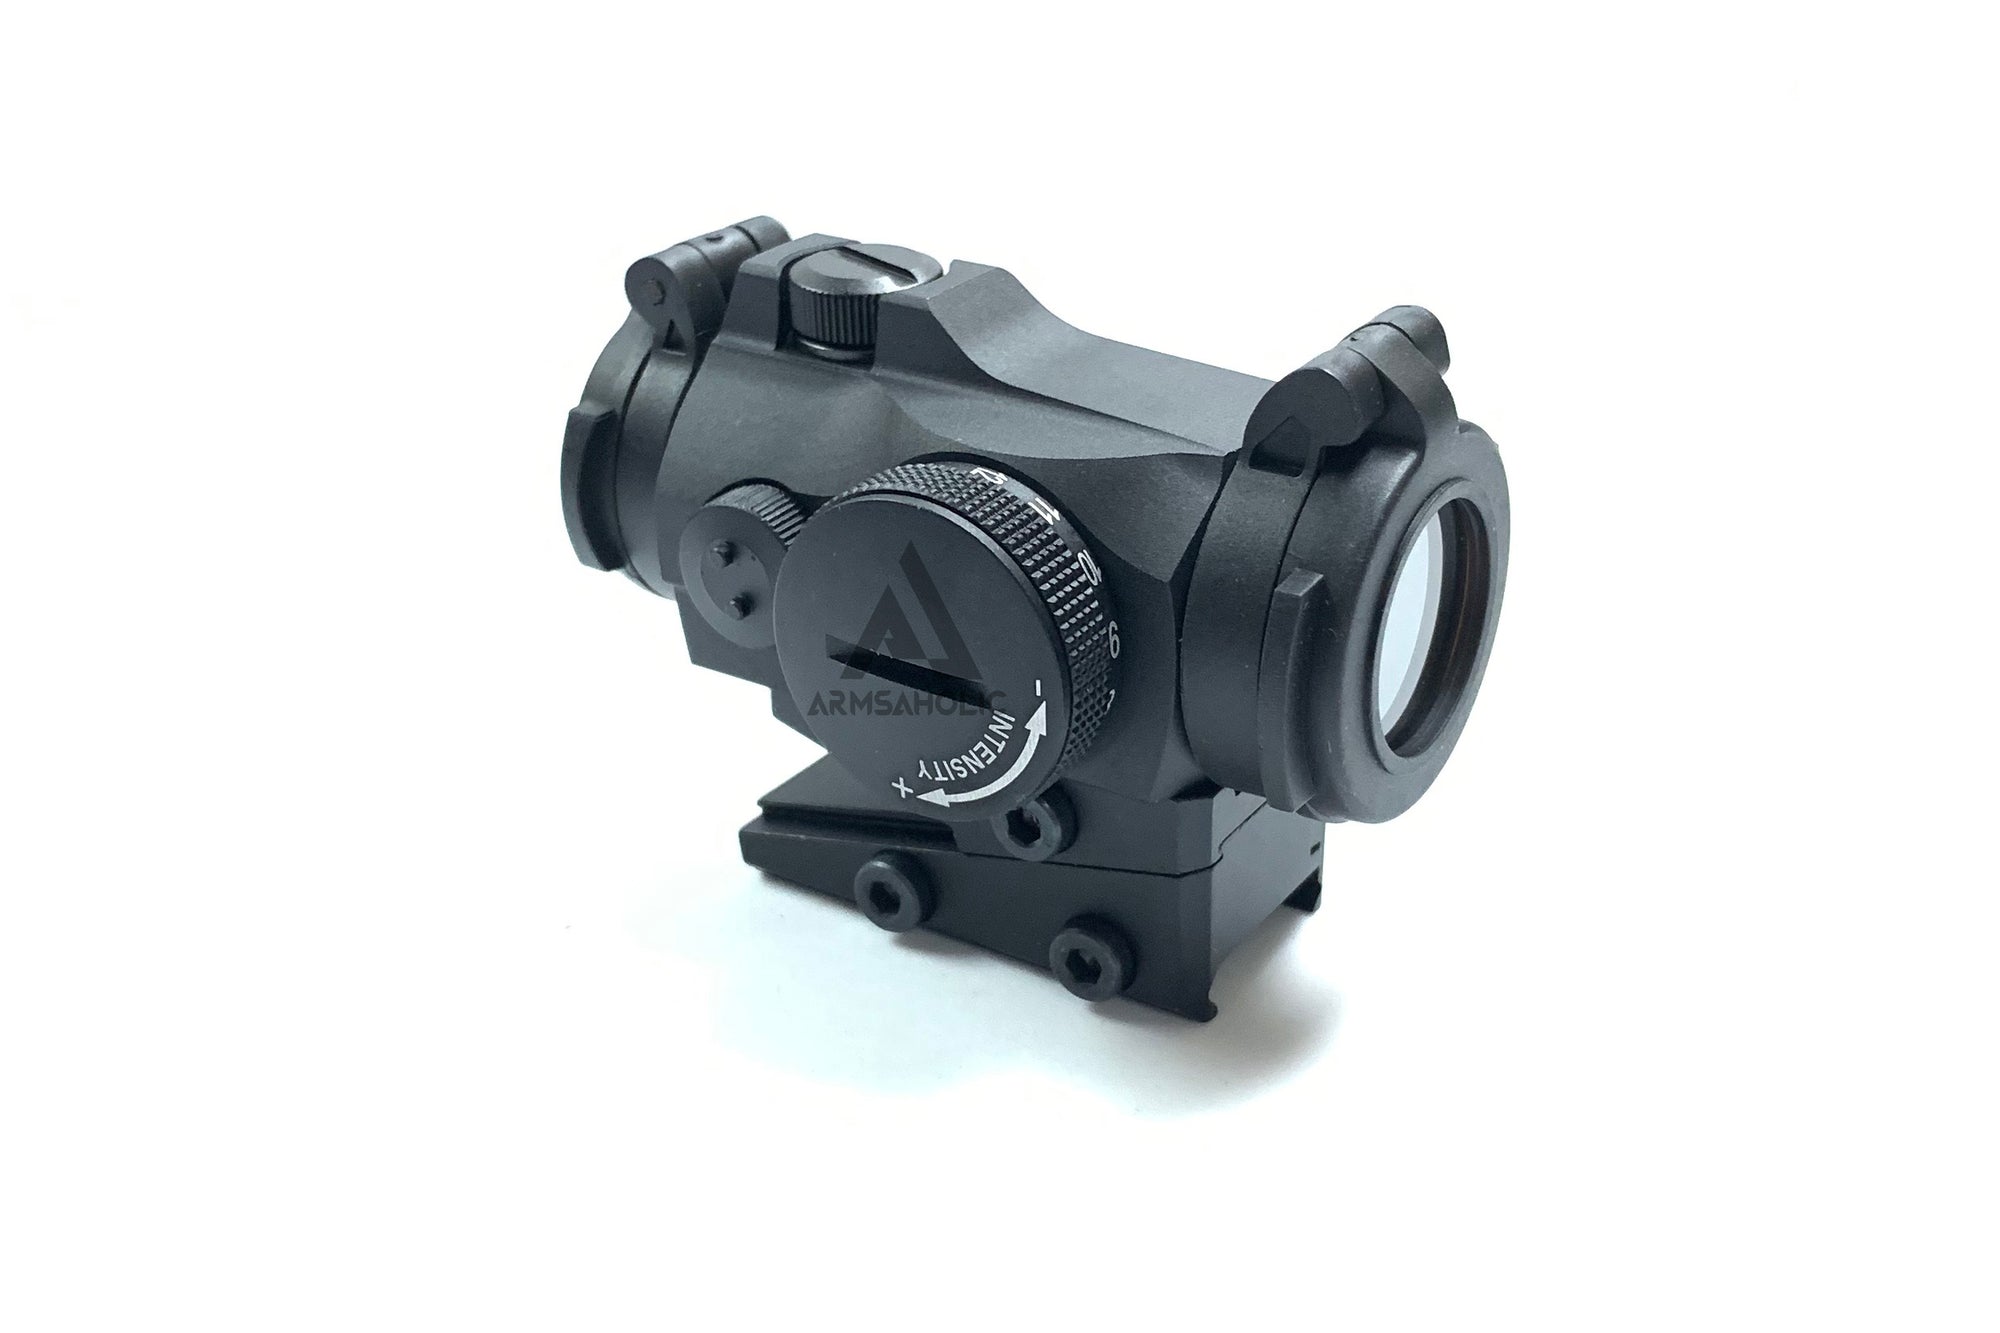 T2 Pro Red Dot Sight with variable low/high Mount (Black)